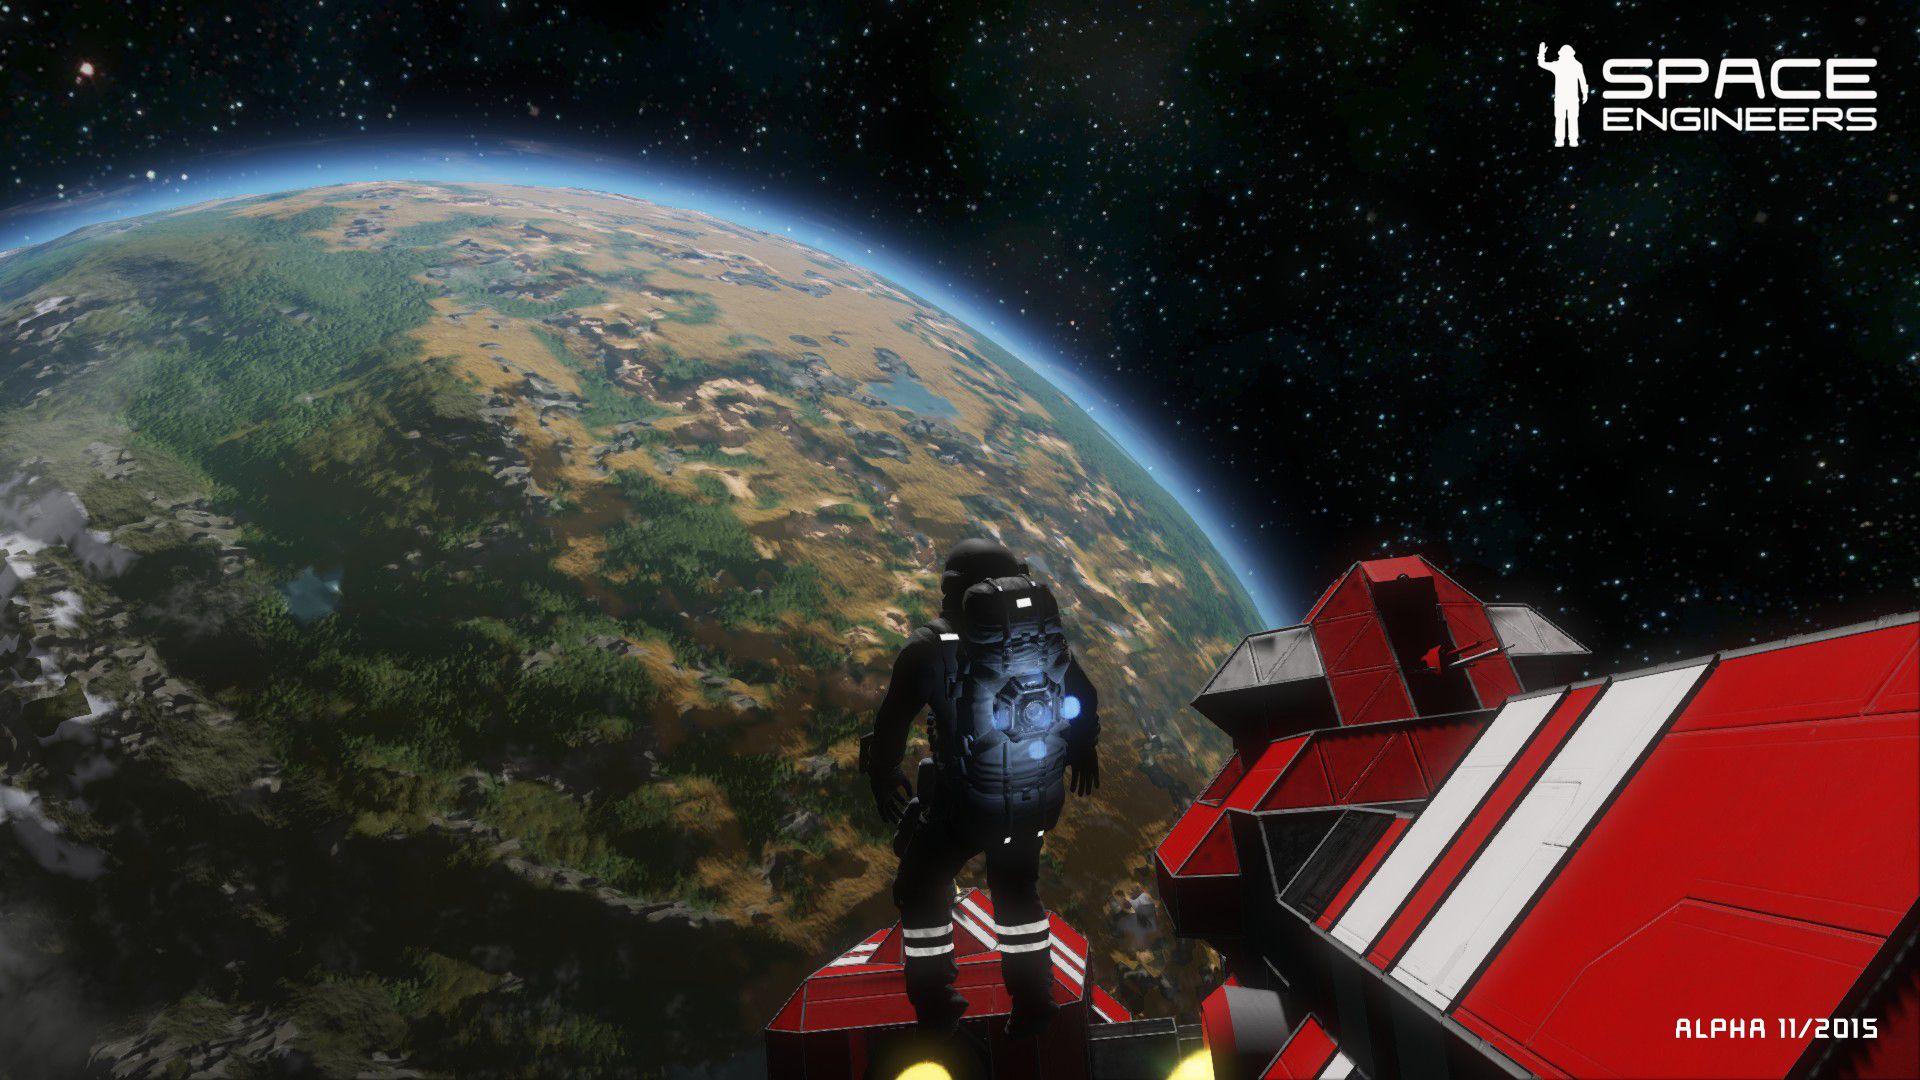 Space engineers Full HD Wallpaper and Background Imagex1080